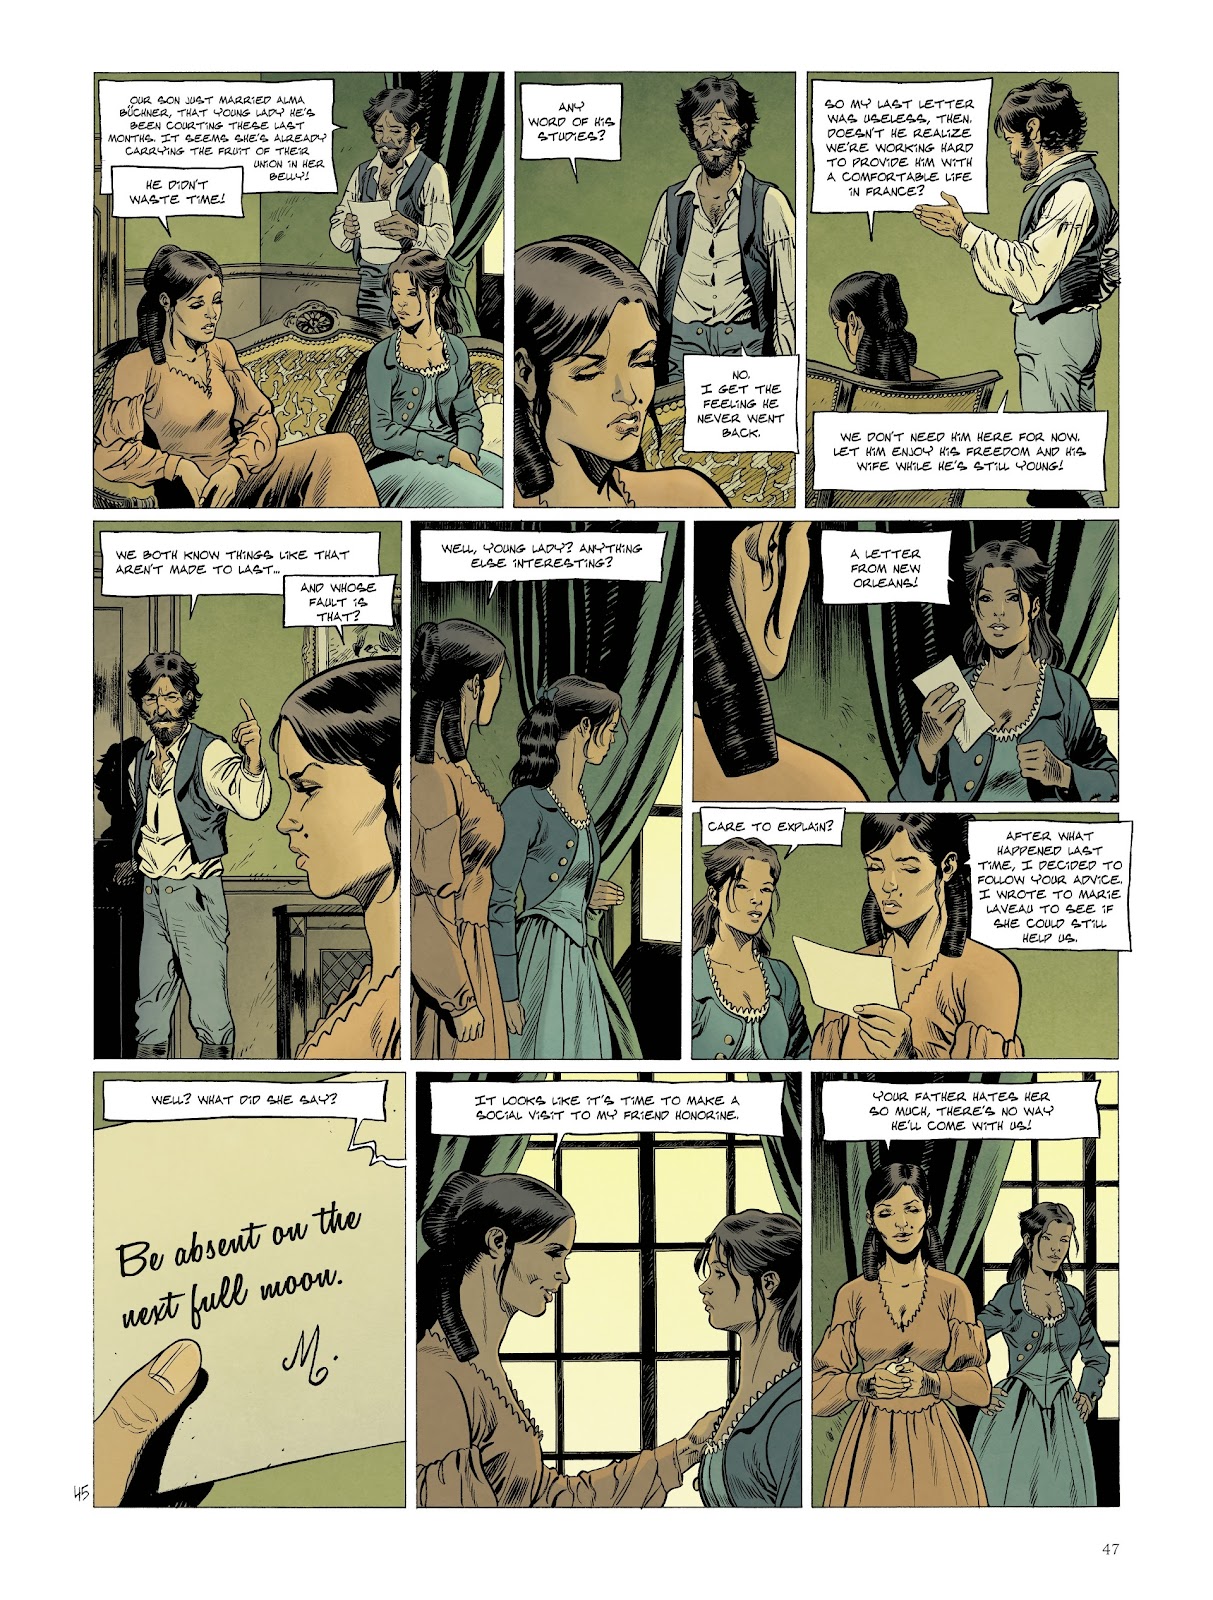 Louisiana: The Color of Blood issue 1 - Page 49